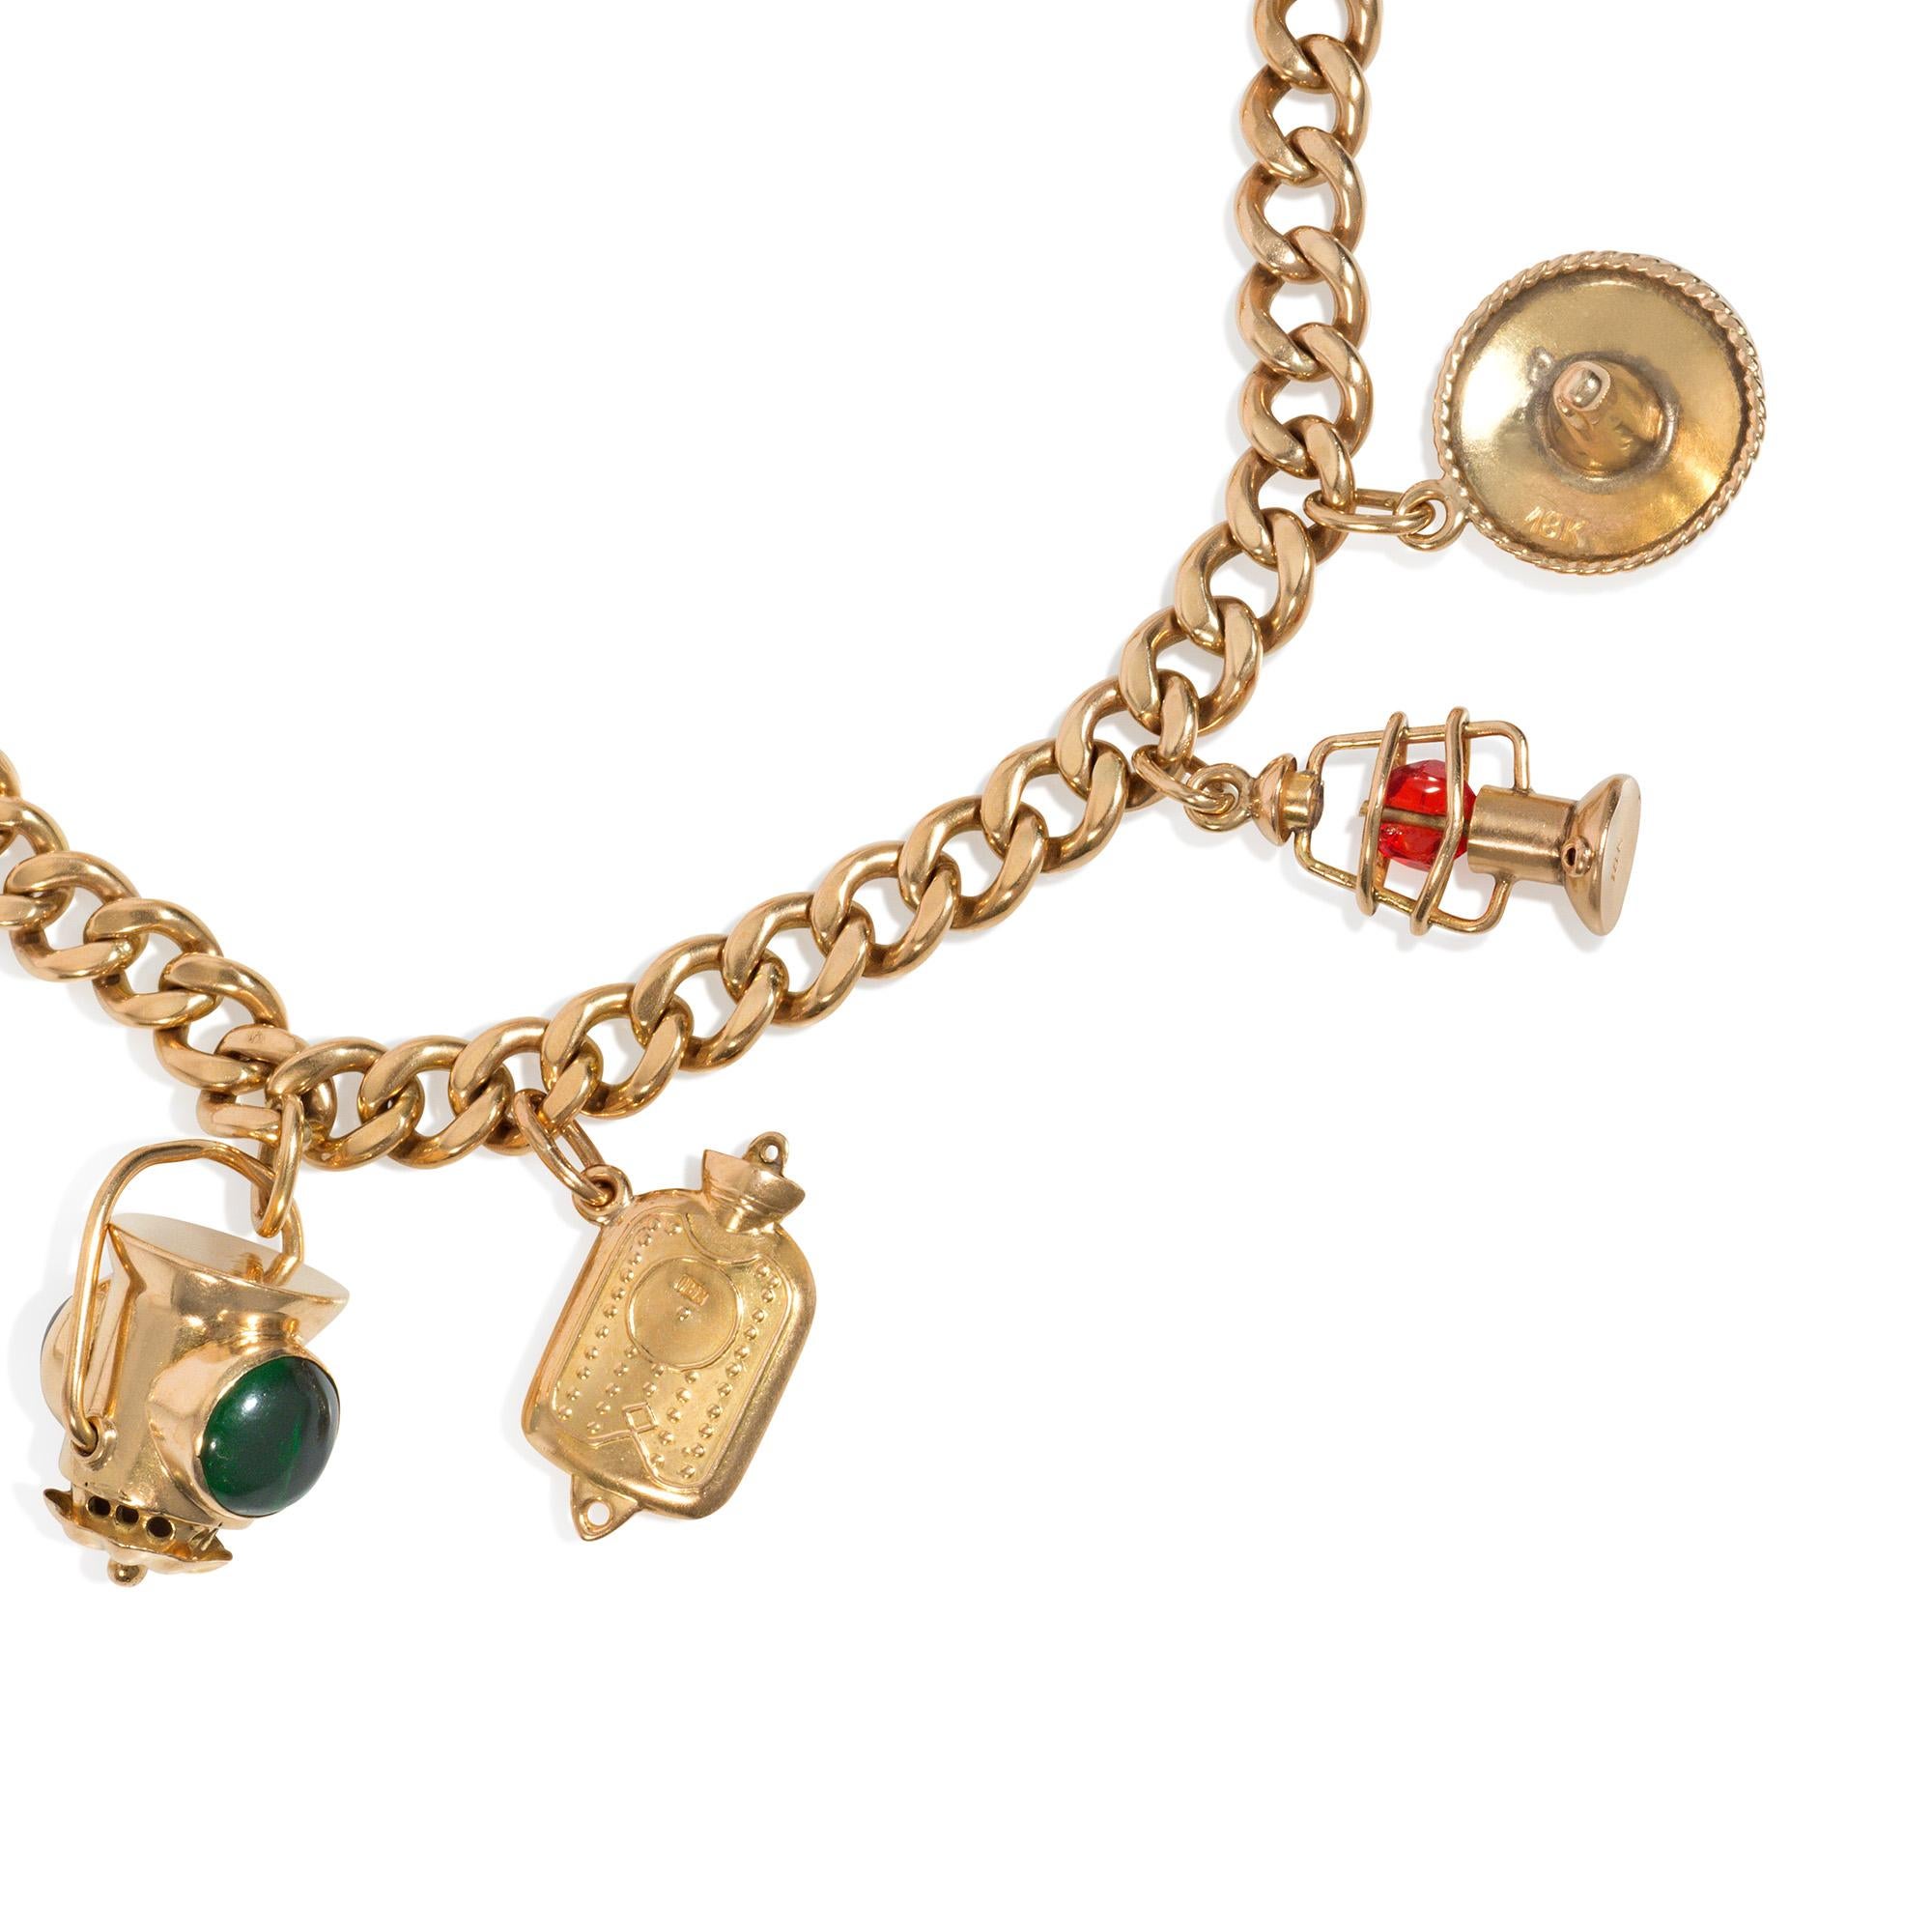 A Retro gold curblink charm bracelet suspending eight charms designed as a lighthouse, two nautical lanterns, a hot water bottle, a heart, a telephone, a sombrero, and a ball, in 18k. 